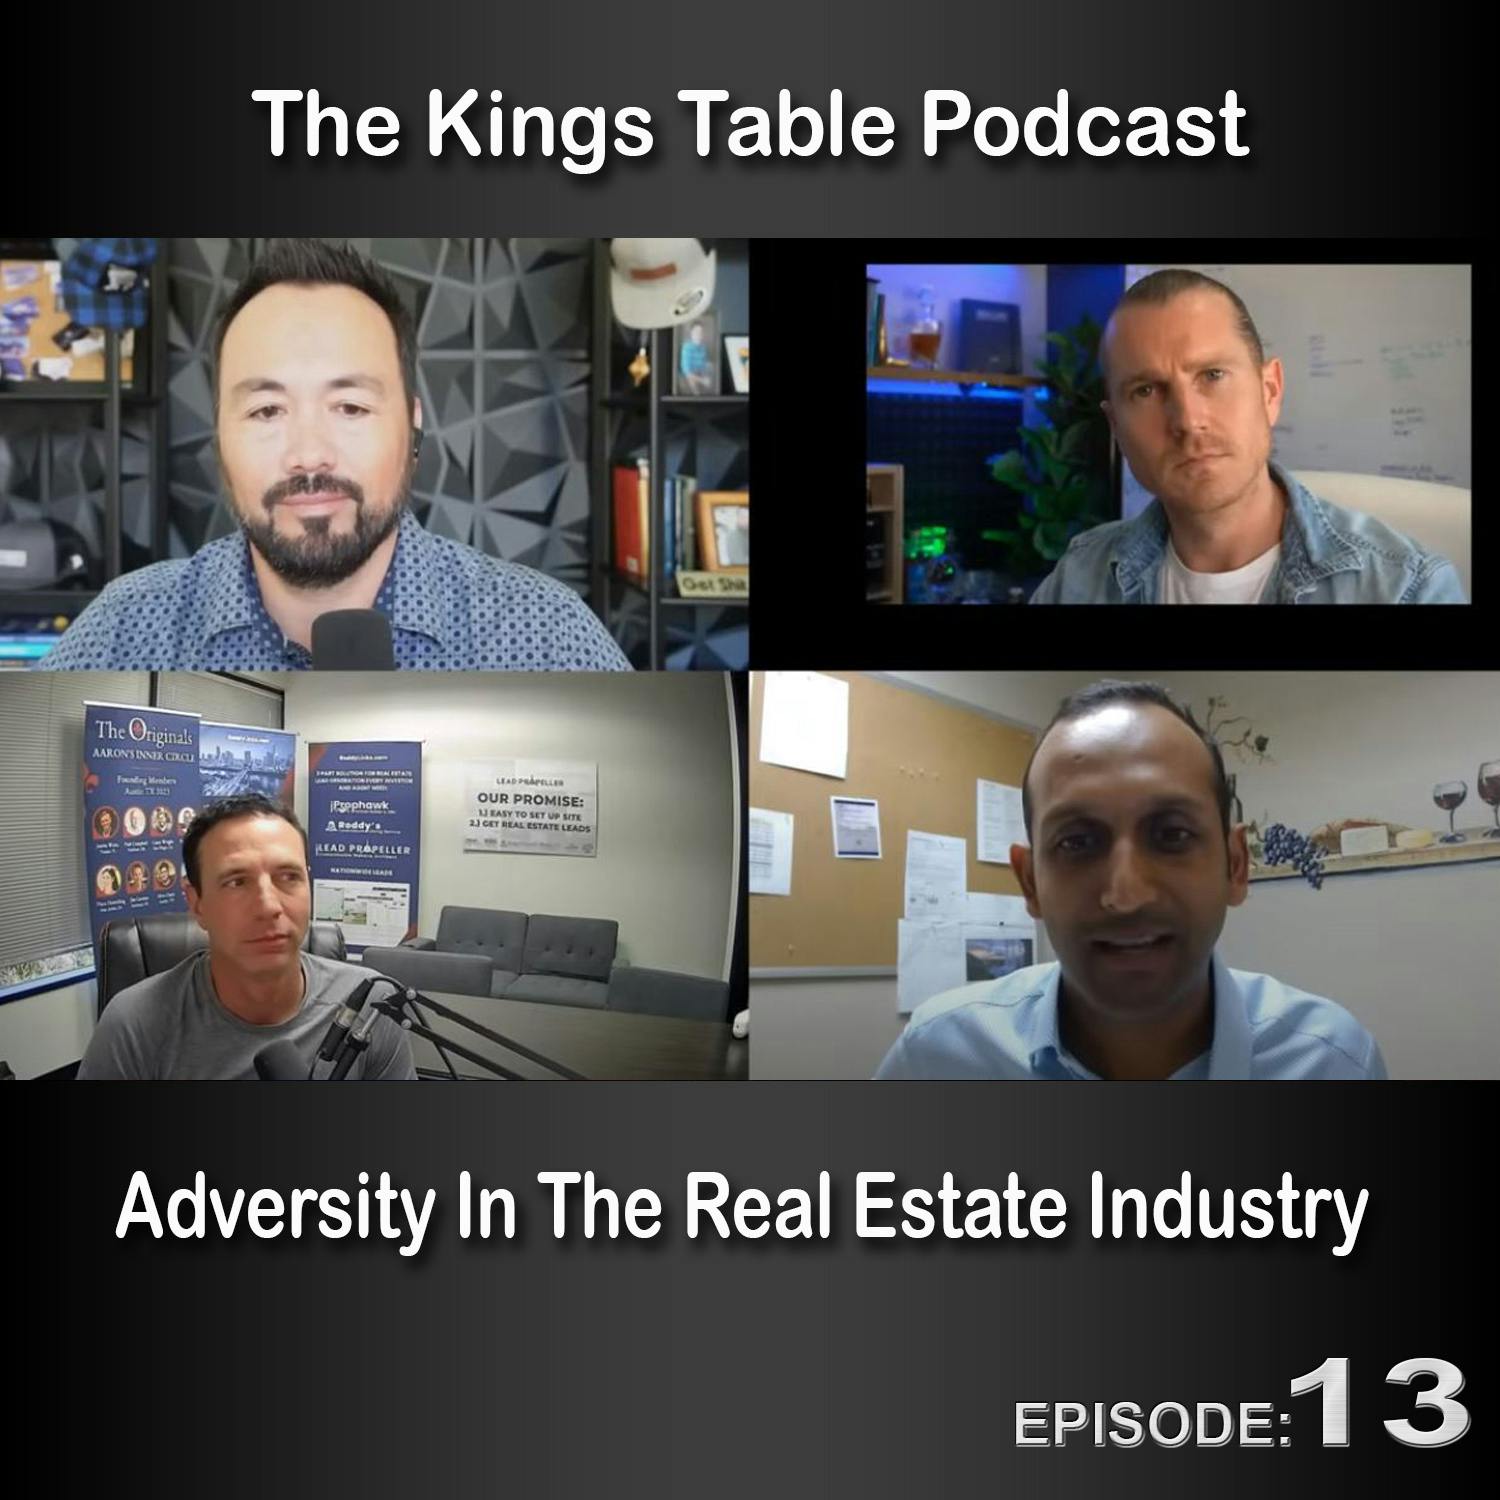 The Kings Table Episode 13 - Adversity in the Real Estate Industry